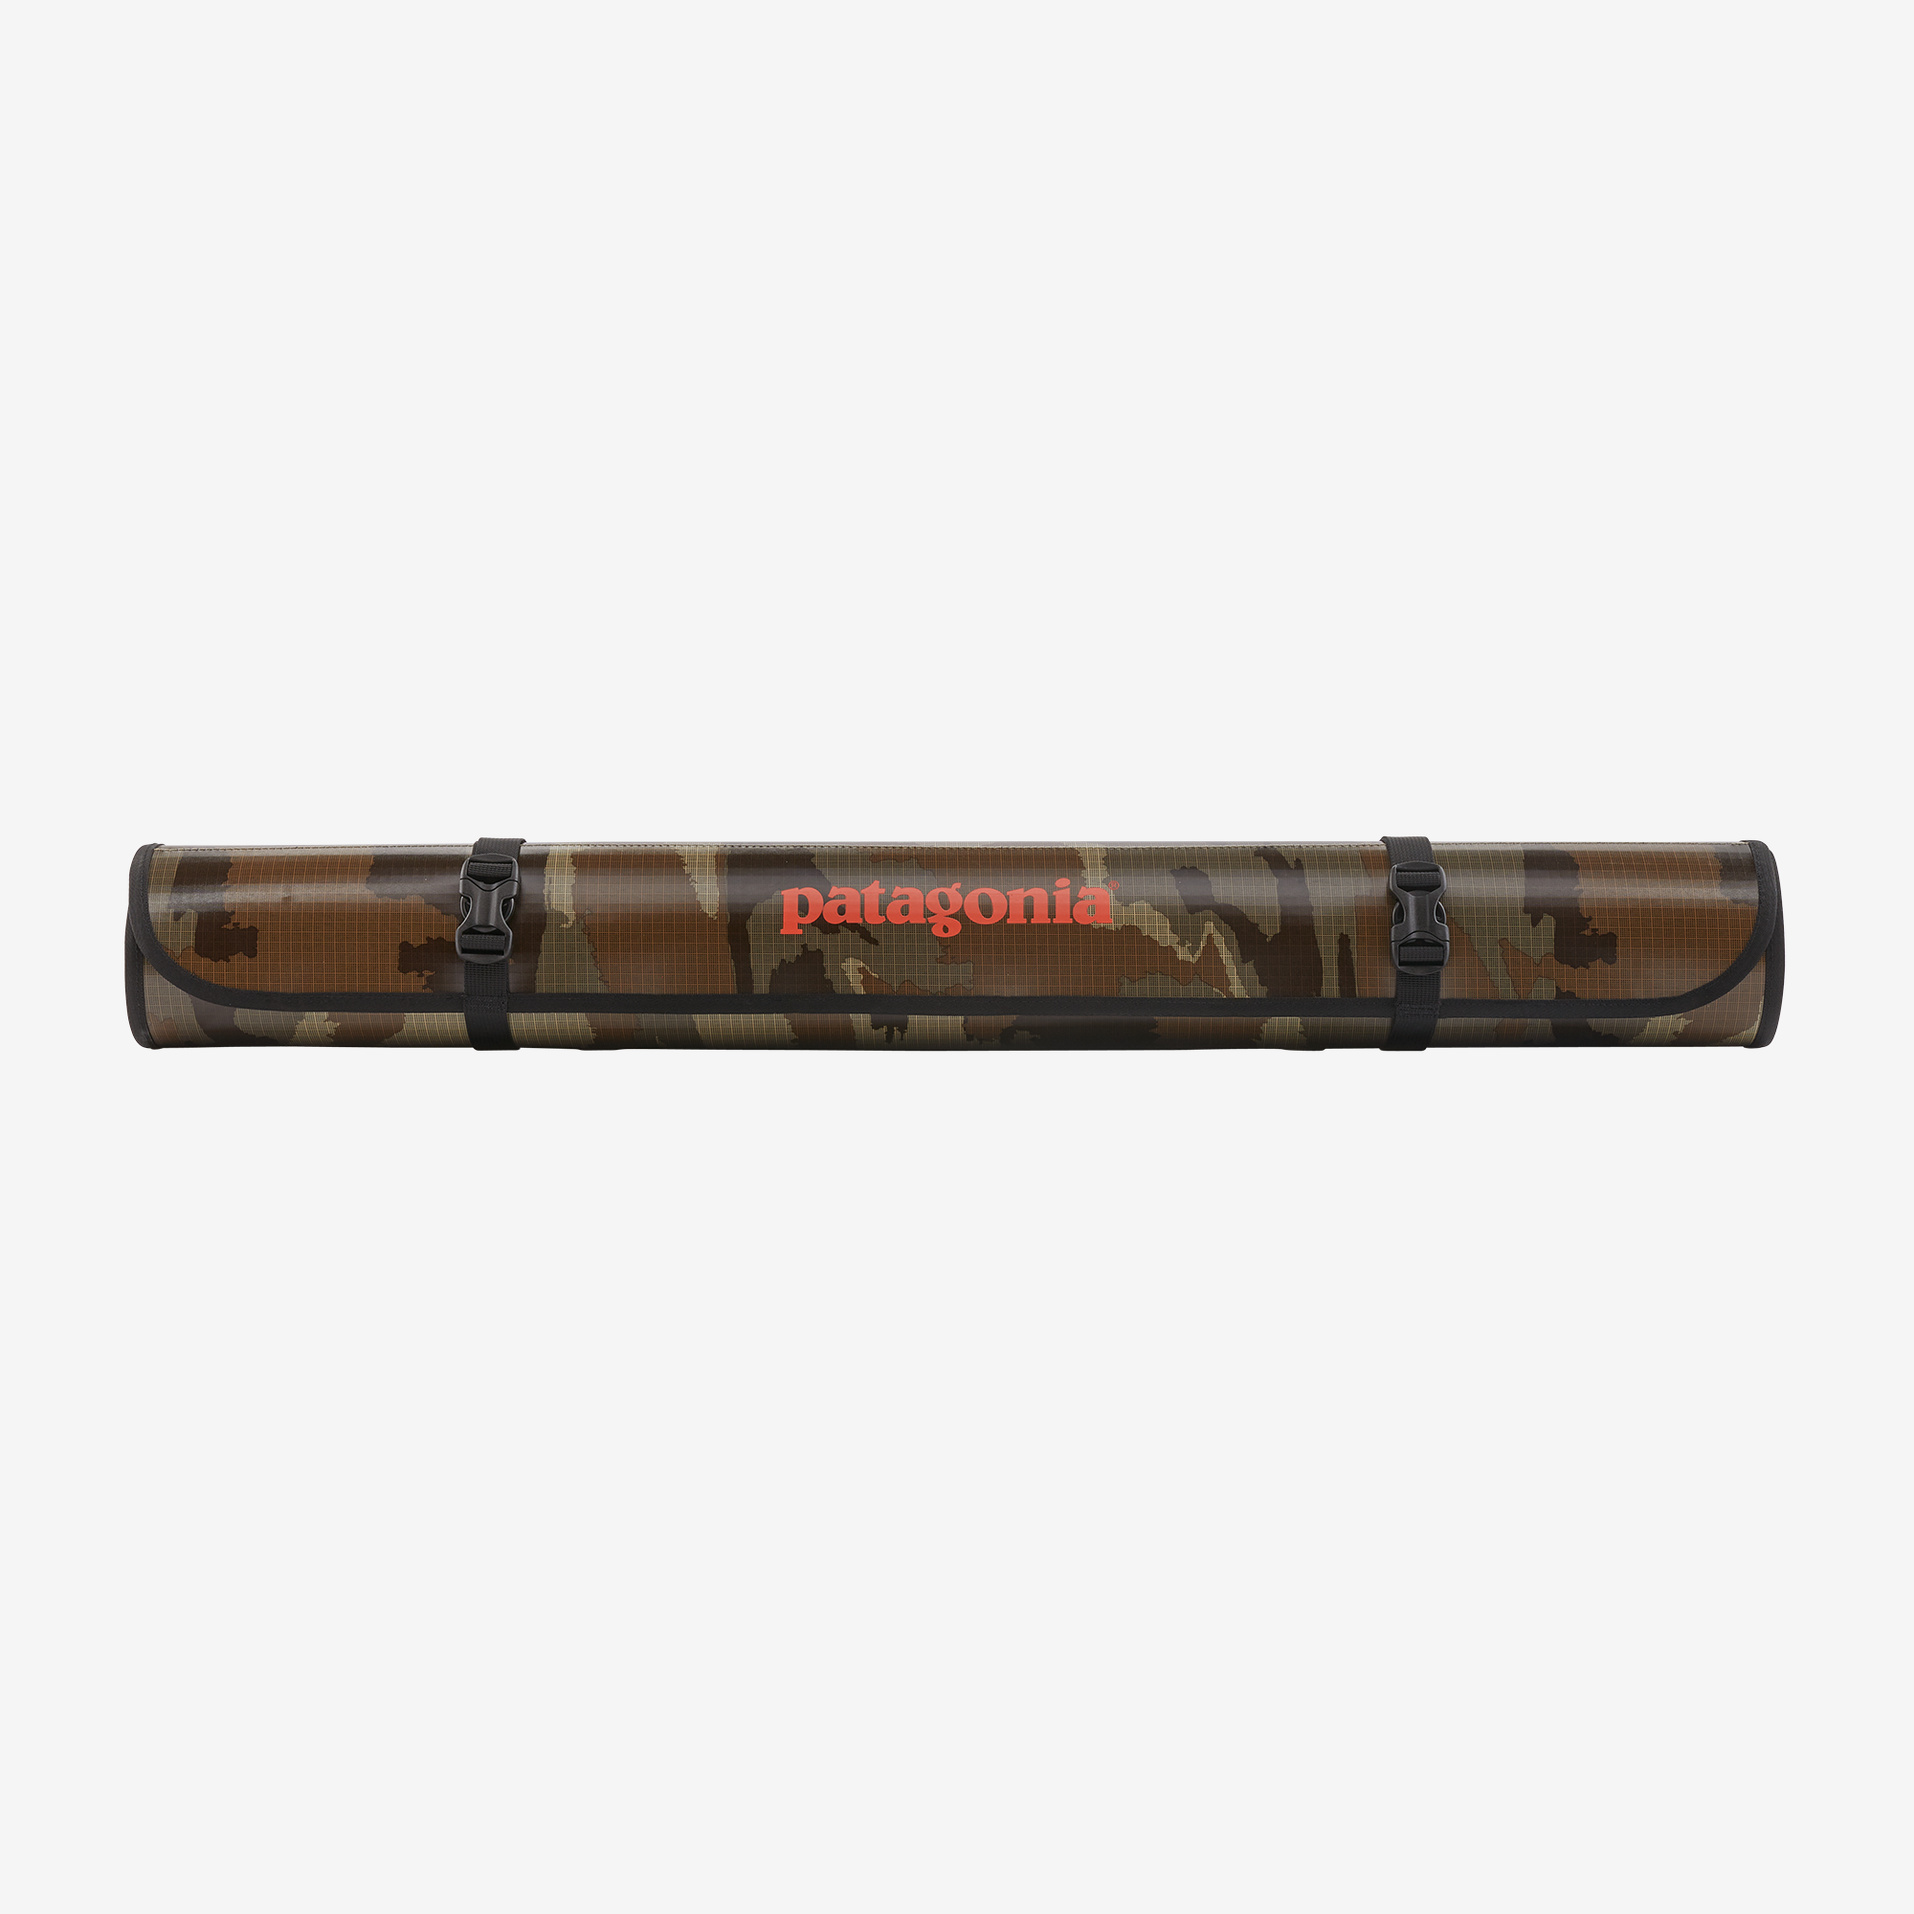 Patagonia Travel Rod Roll - Chartreuse - S/M